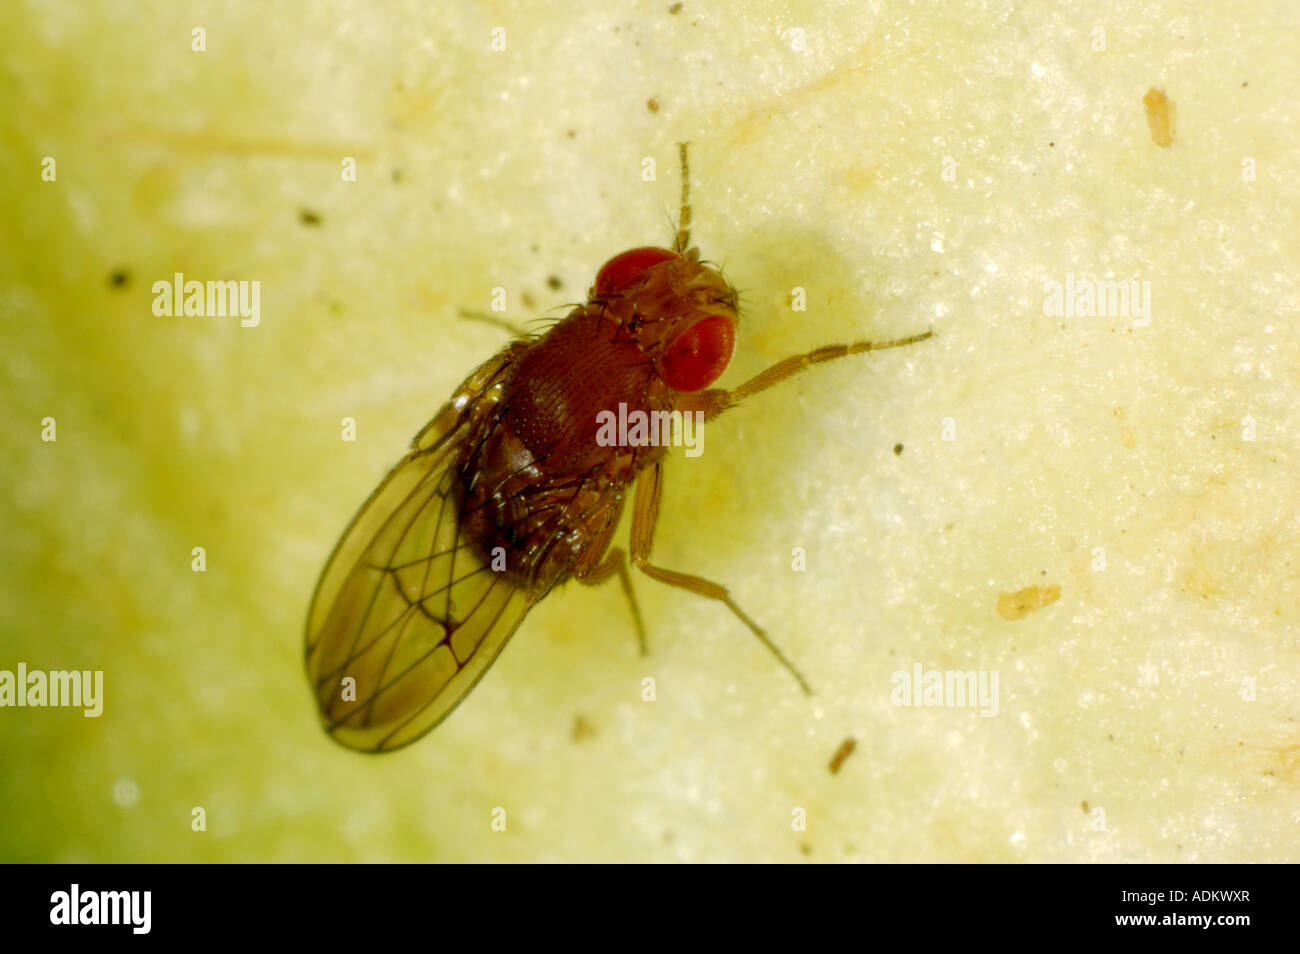 Adult fruit fly Drosophila sp a genus used for experiments because of their rapid breeding cycle Stock Photo